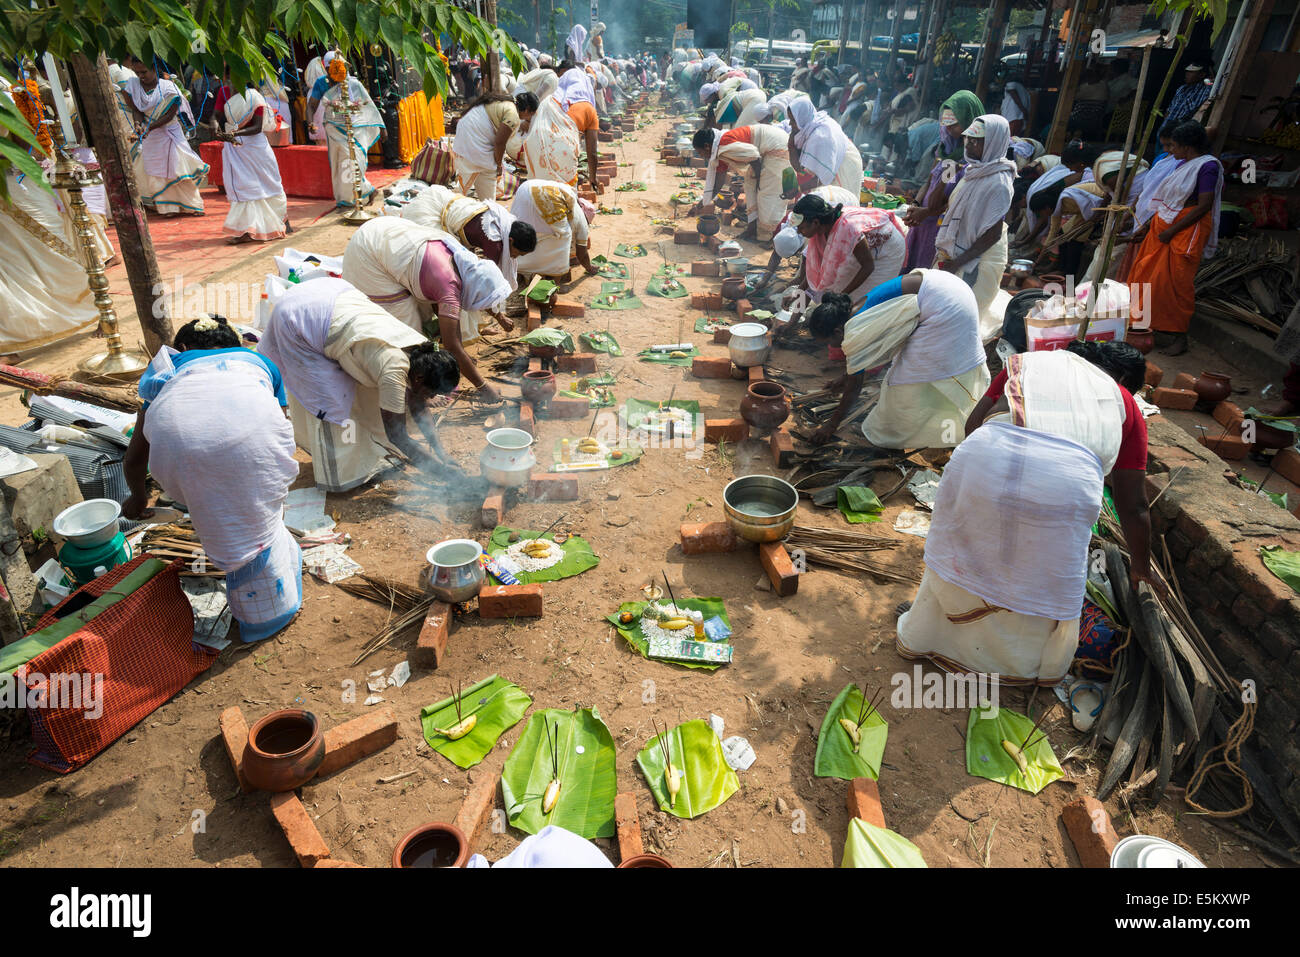 Women cooking Prasad in the busy streets during the Pongala festival, Thiruvananthapuram, Kerala, India Stock Photo